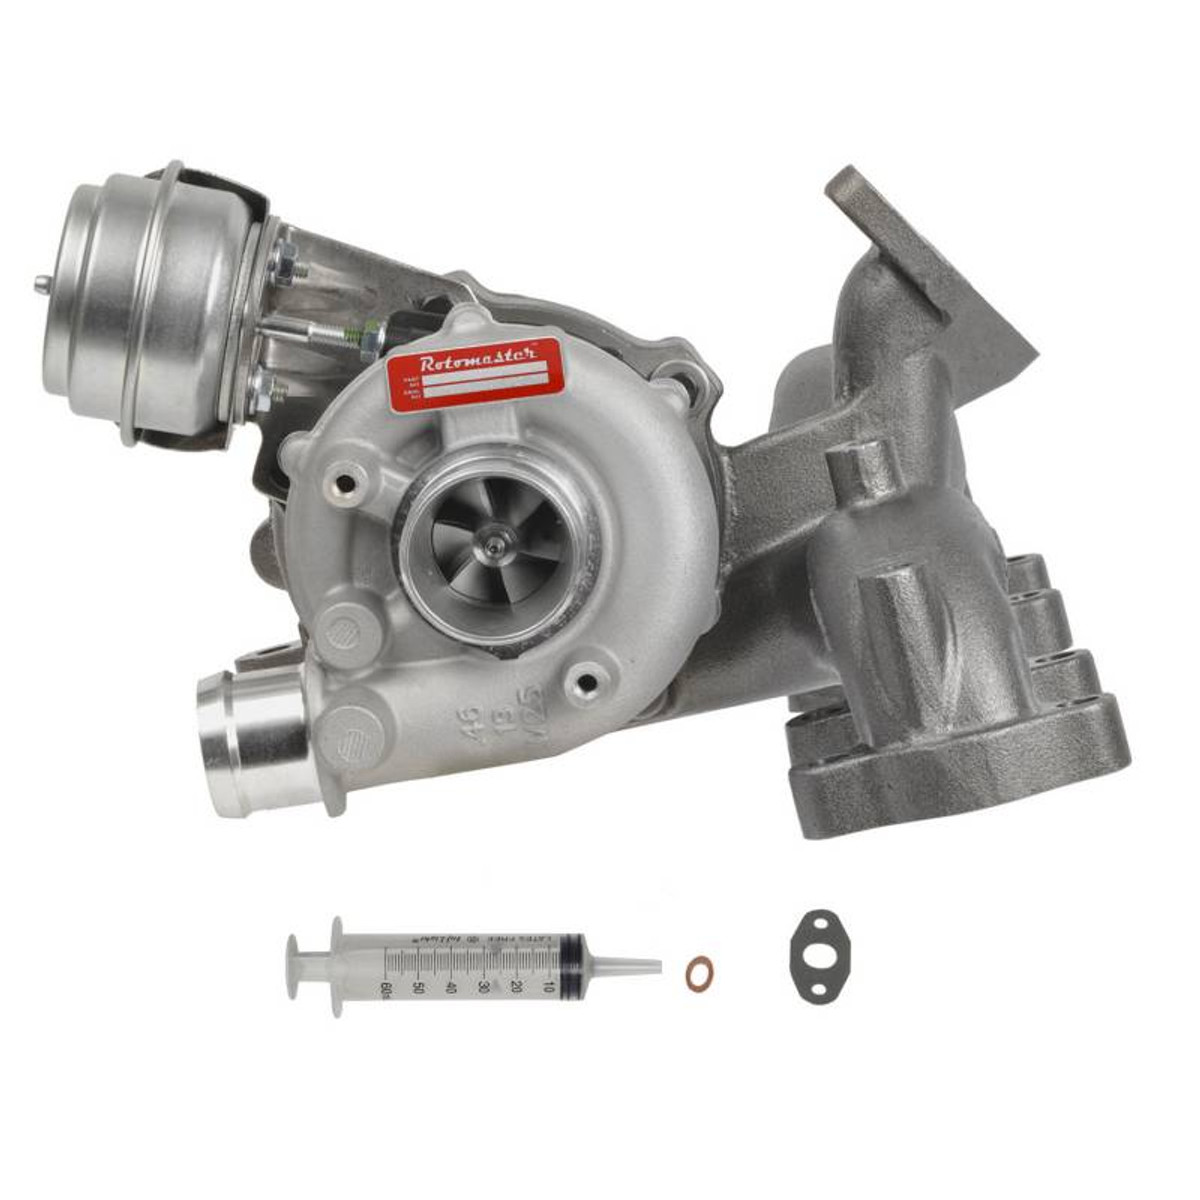 Rotomaster New Turbocharger - 1998-2004 Volkswagen 1.9L A1170101N